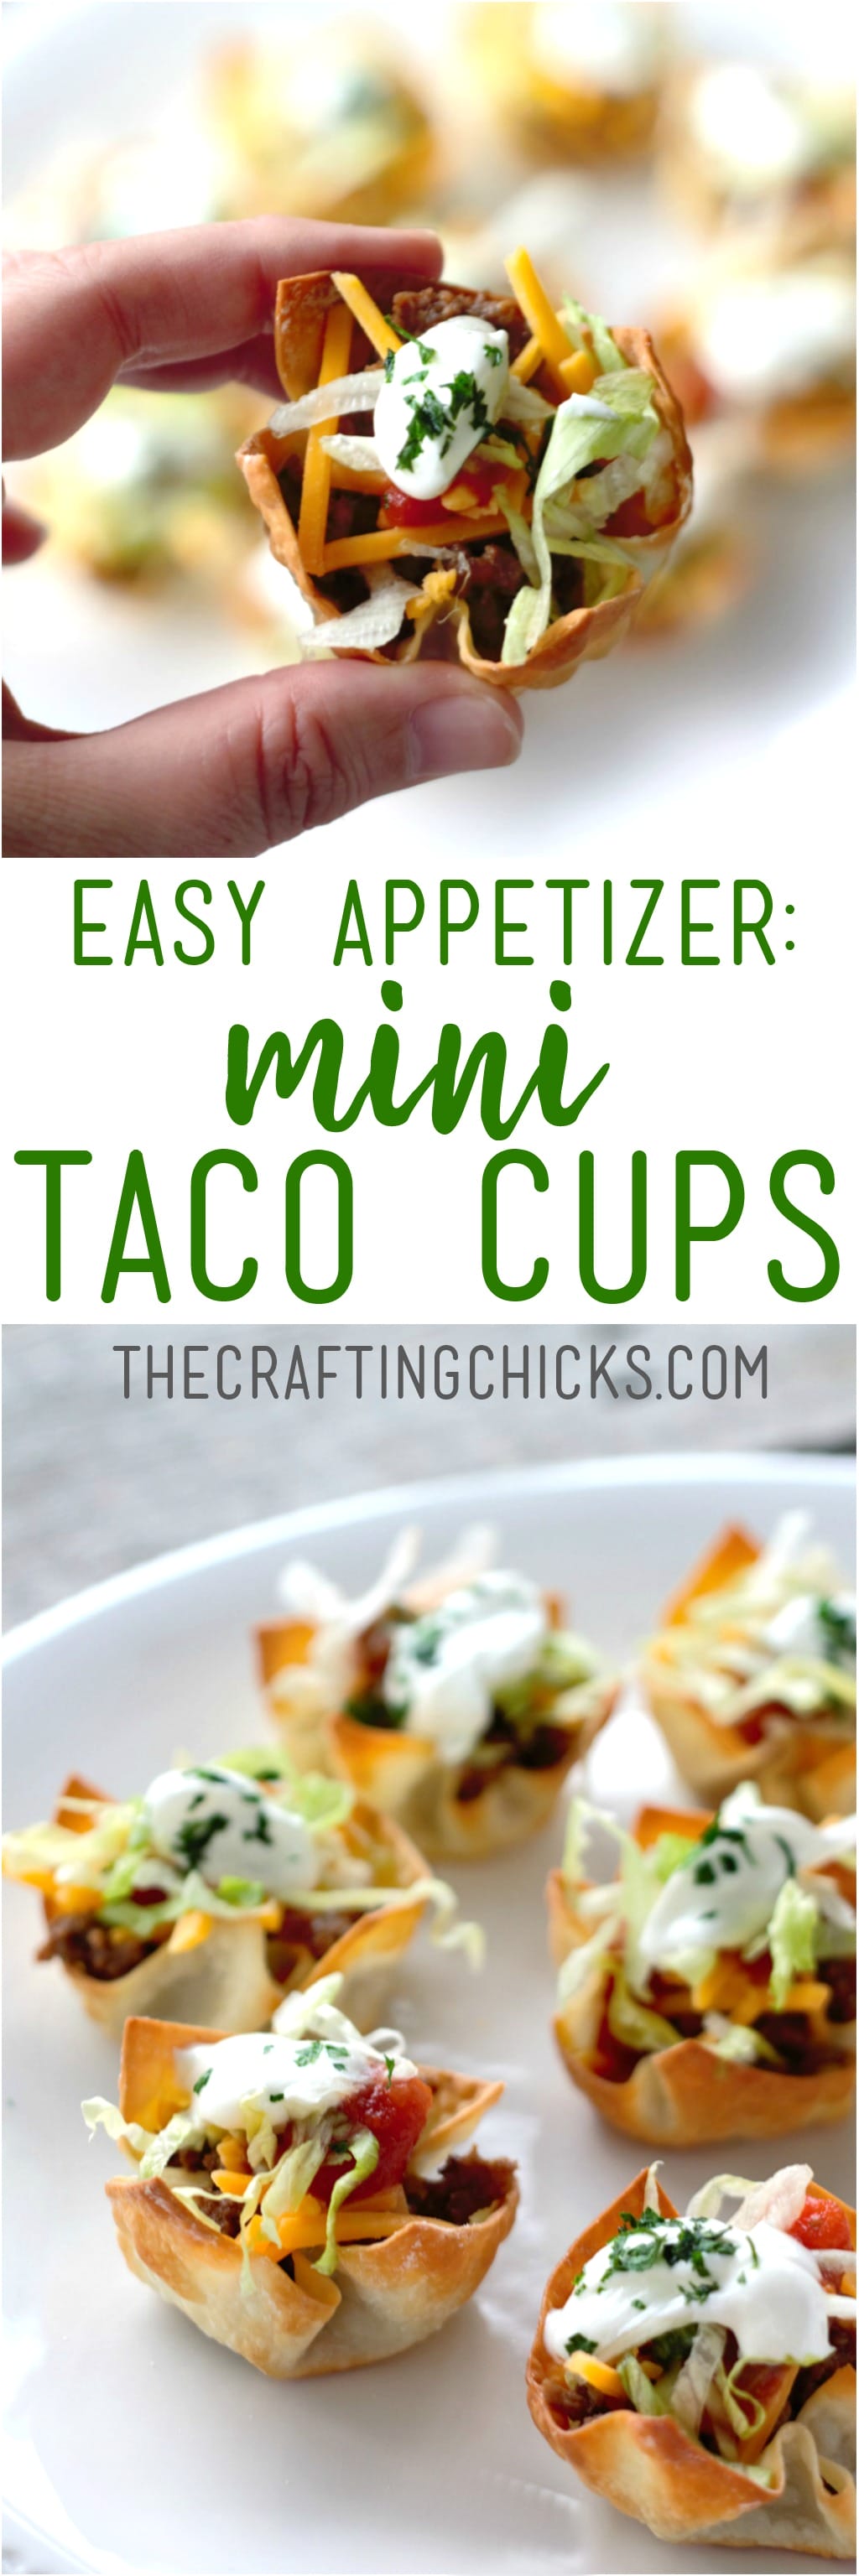 These Mini Taco Cups are the perfect easy appetizer for your new party, New Years Eve or big game! You can have Taco Tuesday any day in a couple tasty bites!